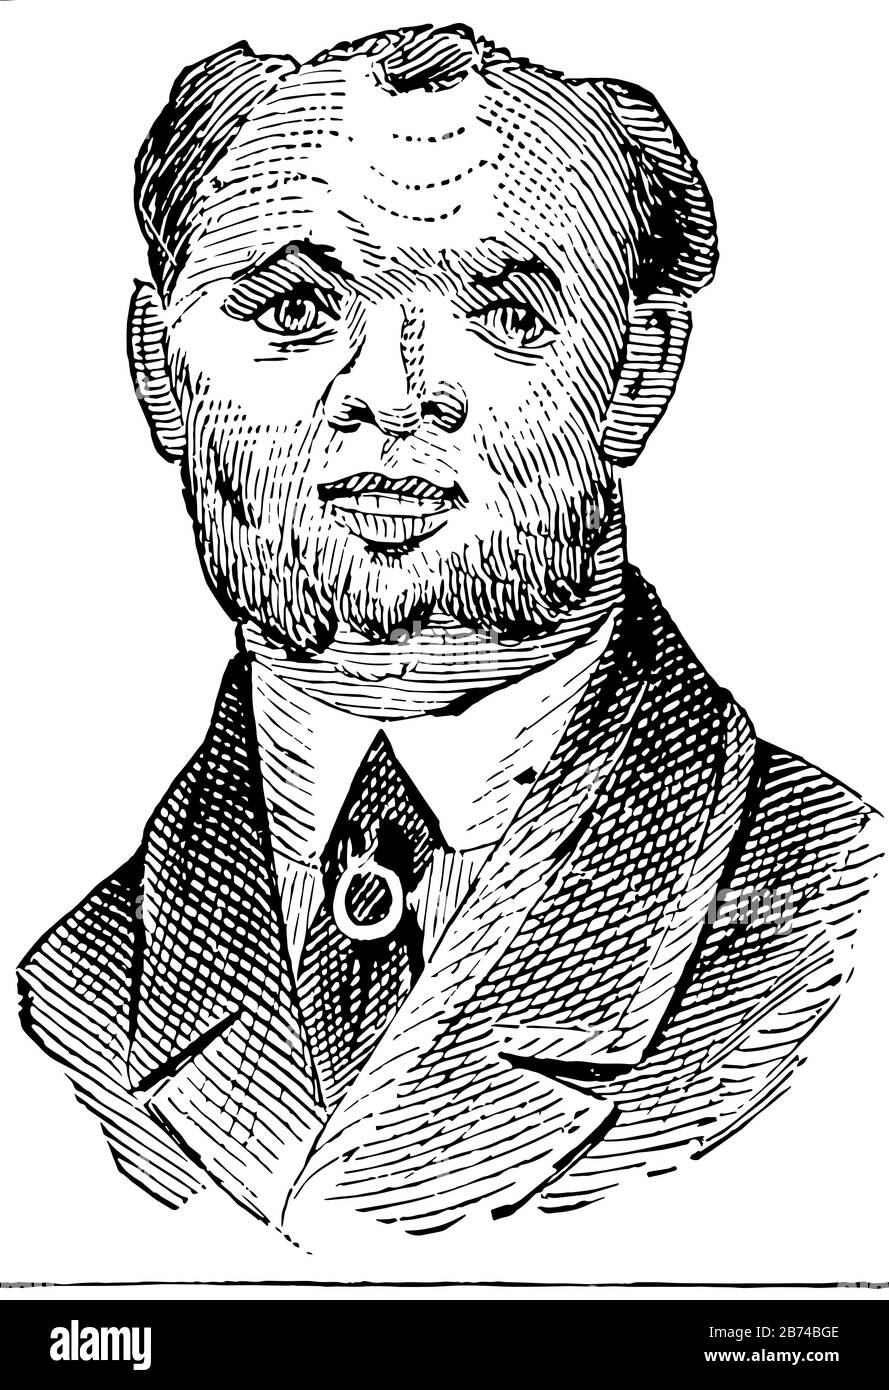 Man's face with beard and tie in this picture, vintage line drawing or engraving illustration. Stock Vector